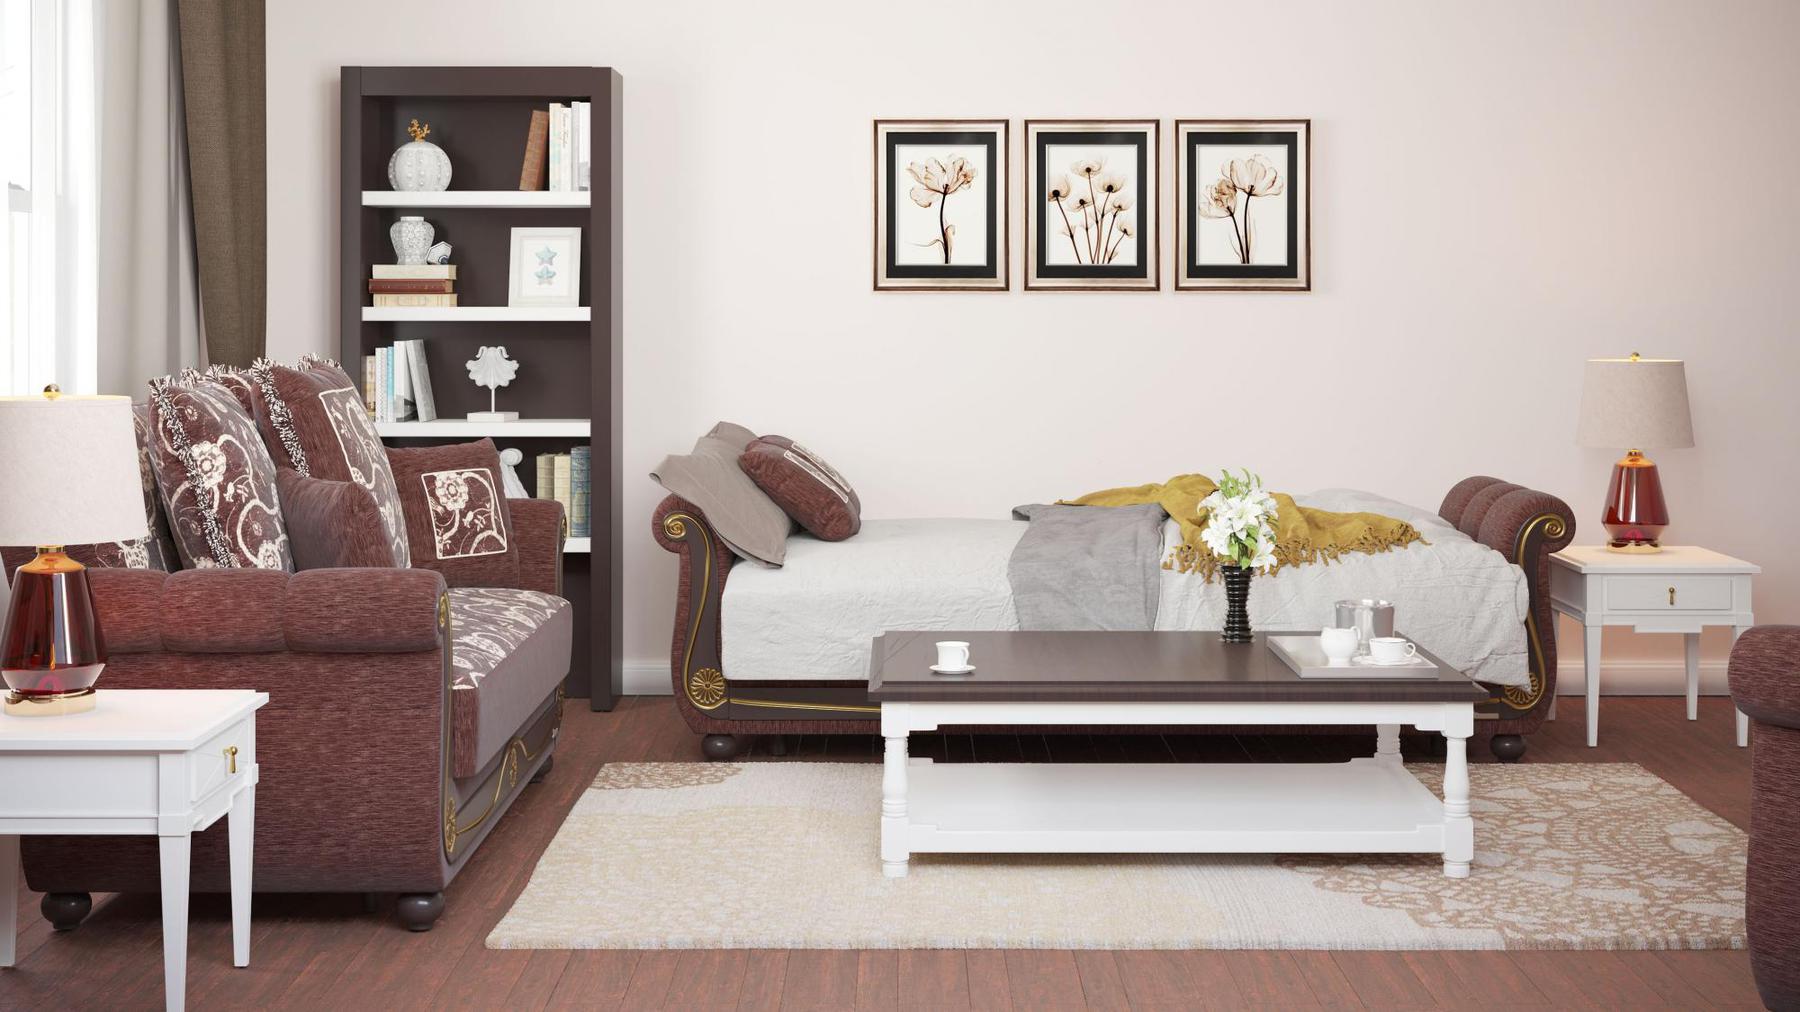 Lawson design, Royal Brown , Chenille  upholstered convertible sleeper Sofabed with underseat storage from Victoria by Ottomanson in living room lifestyle setting converted to sleeper. This Sofabed measures 95 inches width by 40 inches depth by 40 inches height.